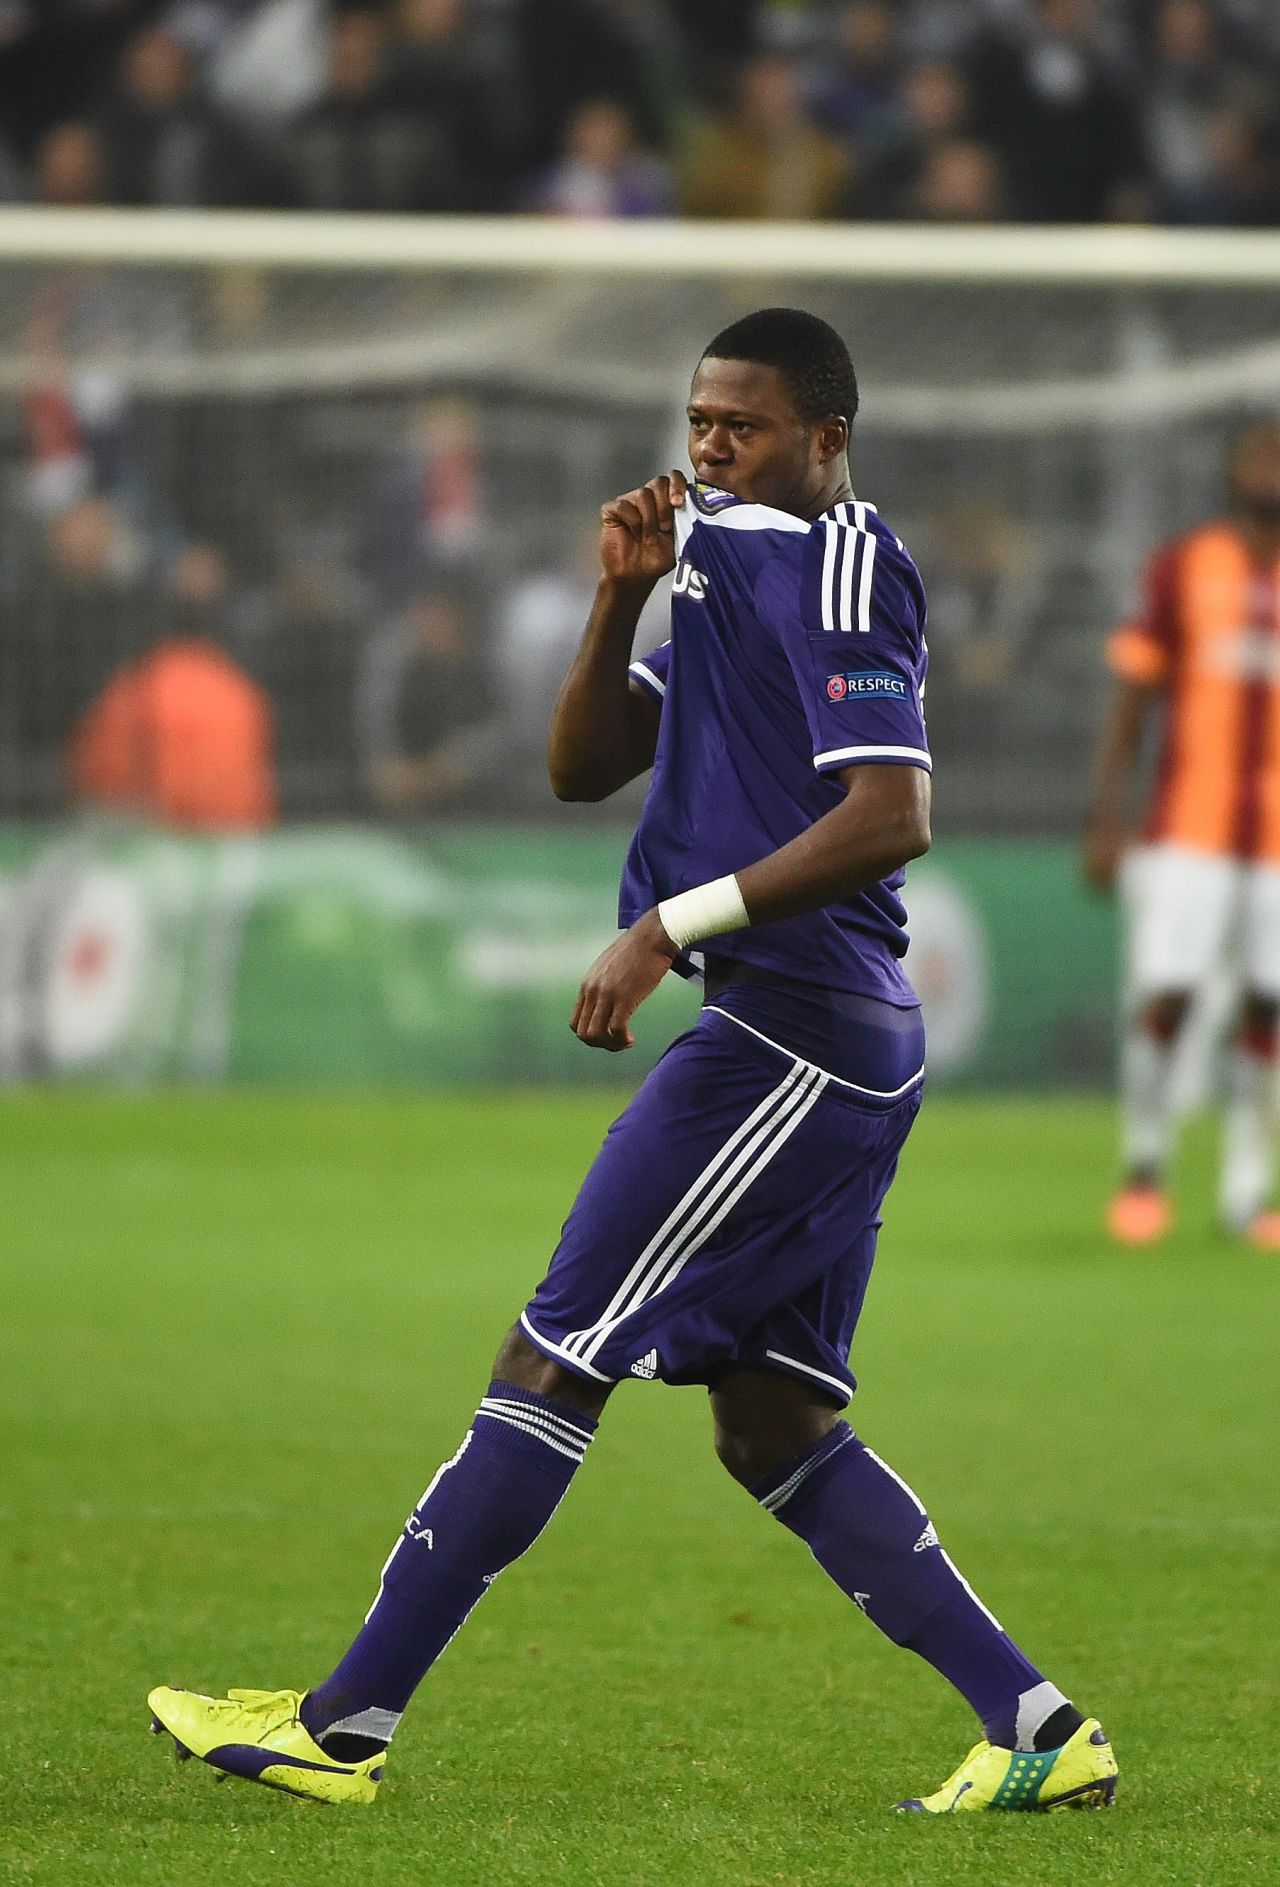 Mbemba made 28 appearances for Anderlecht last season, who finished third in the league.